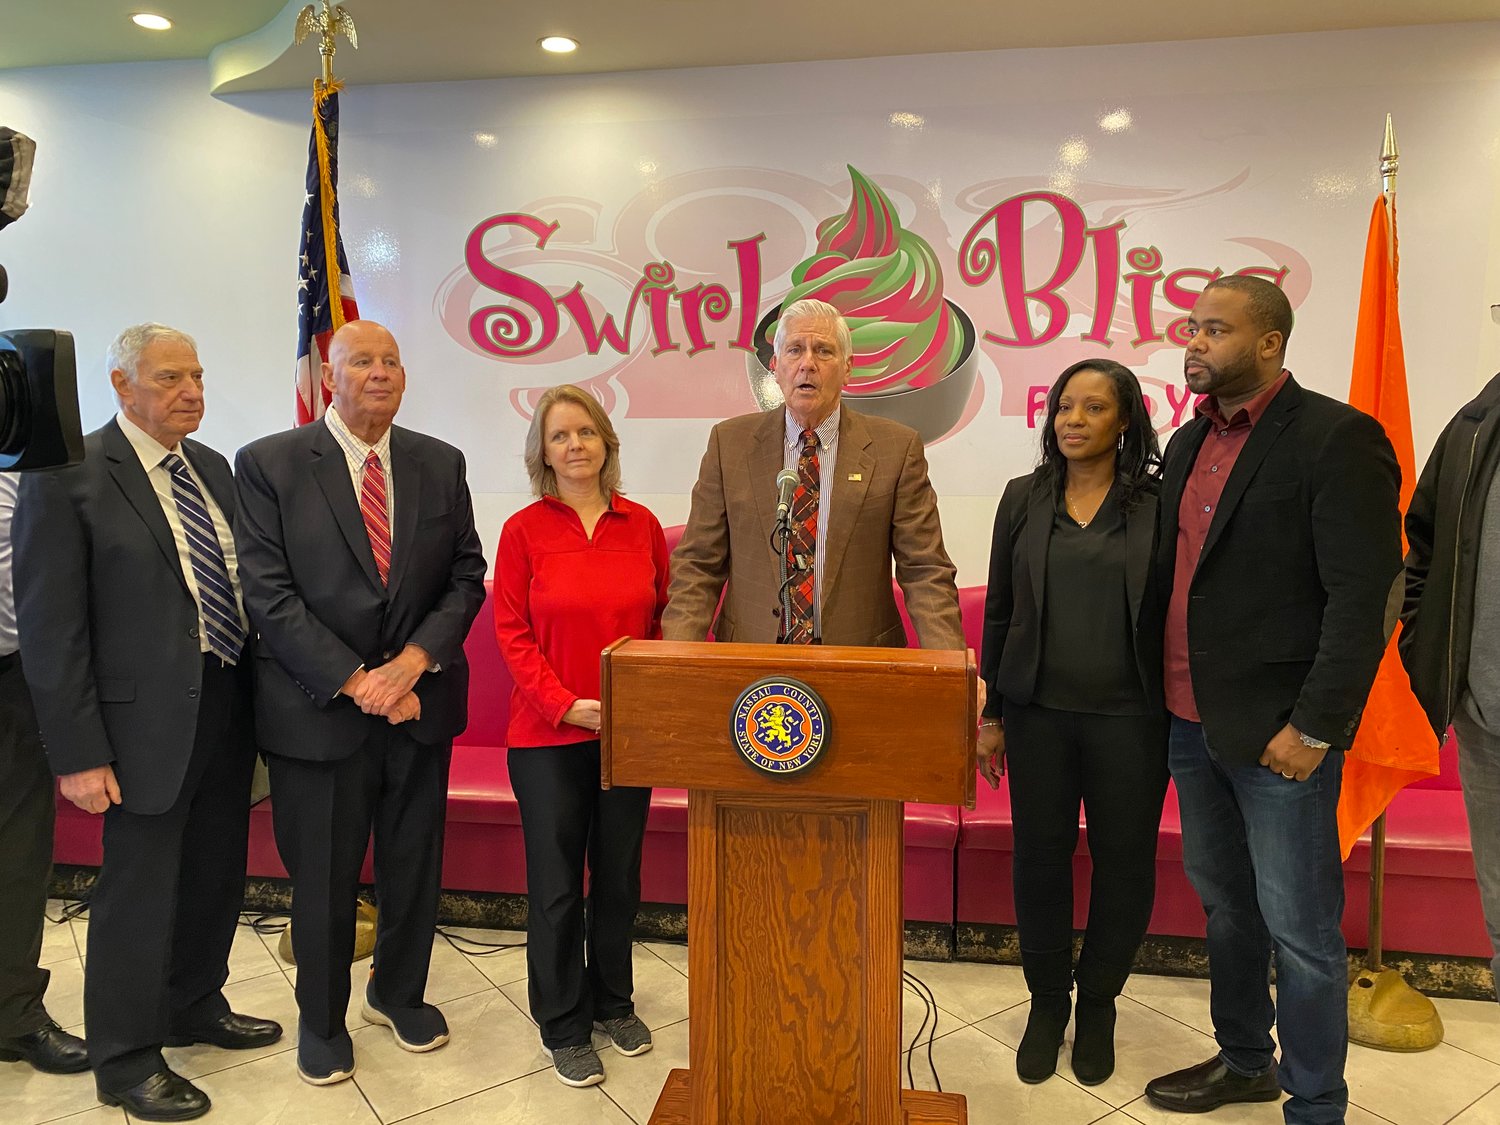 Local merchants, business owners, and county officials to kick off their new holiday shopping season campaign, which encourages Long Island shoppers to shop and dine locally, at Swirl Bliss on Dec. 7.